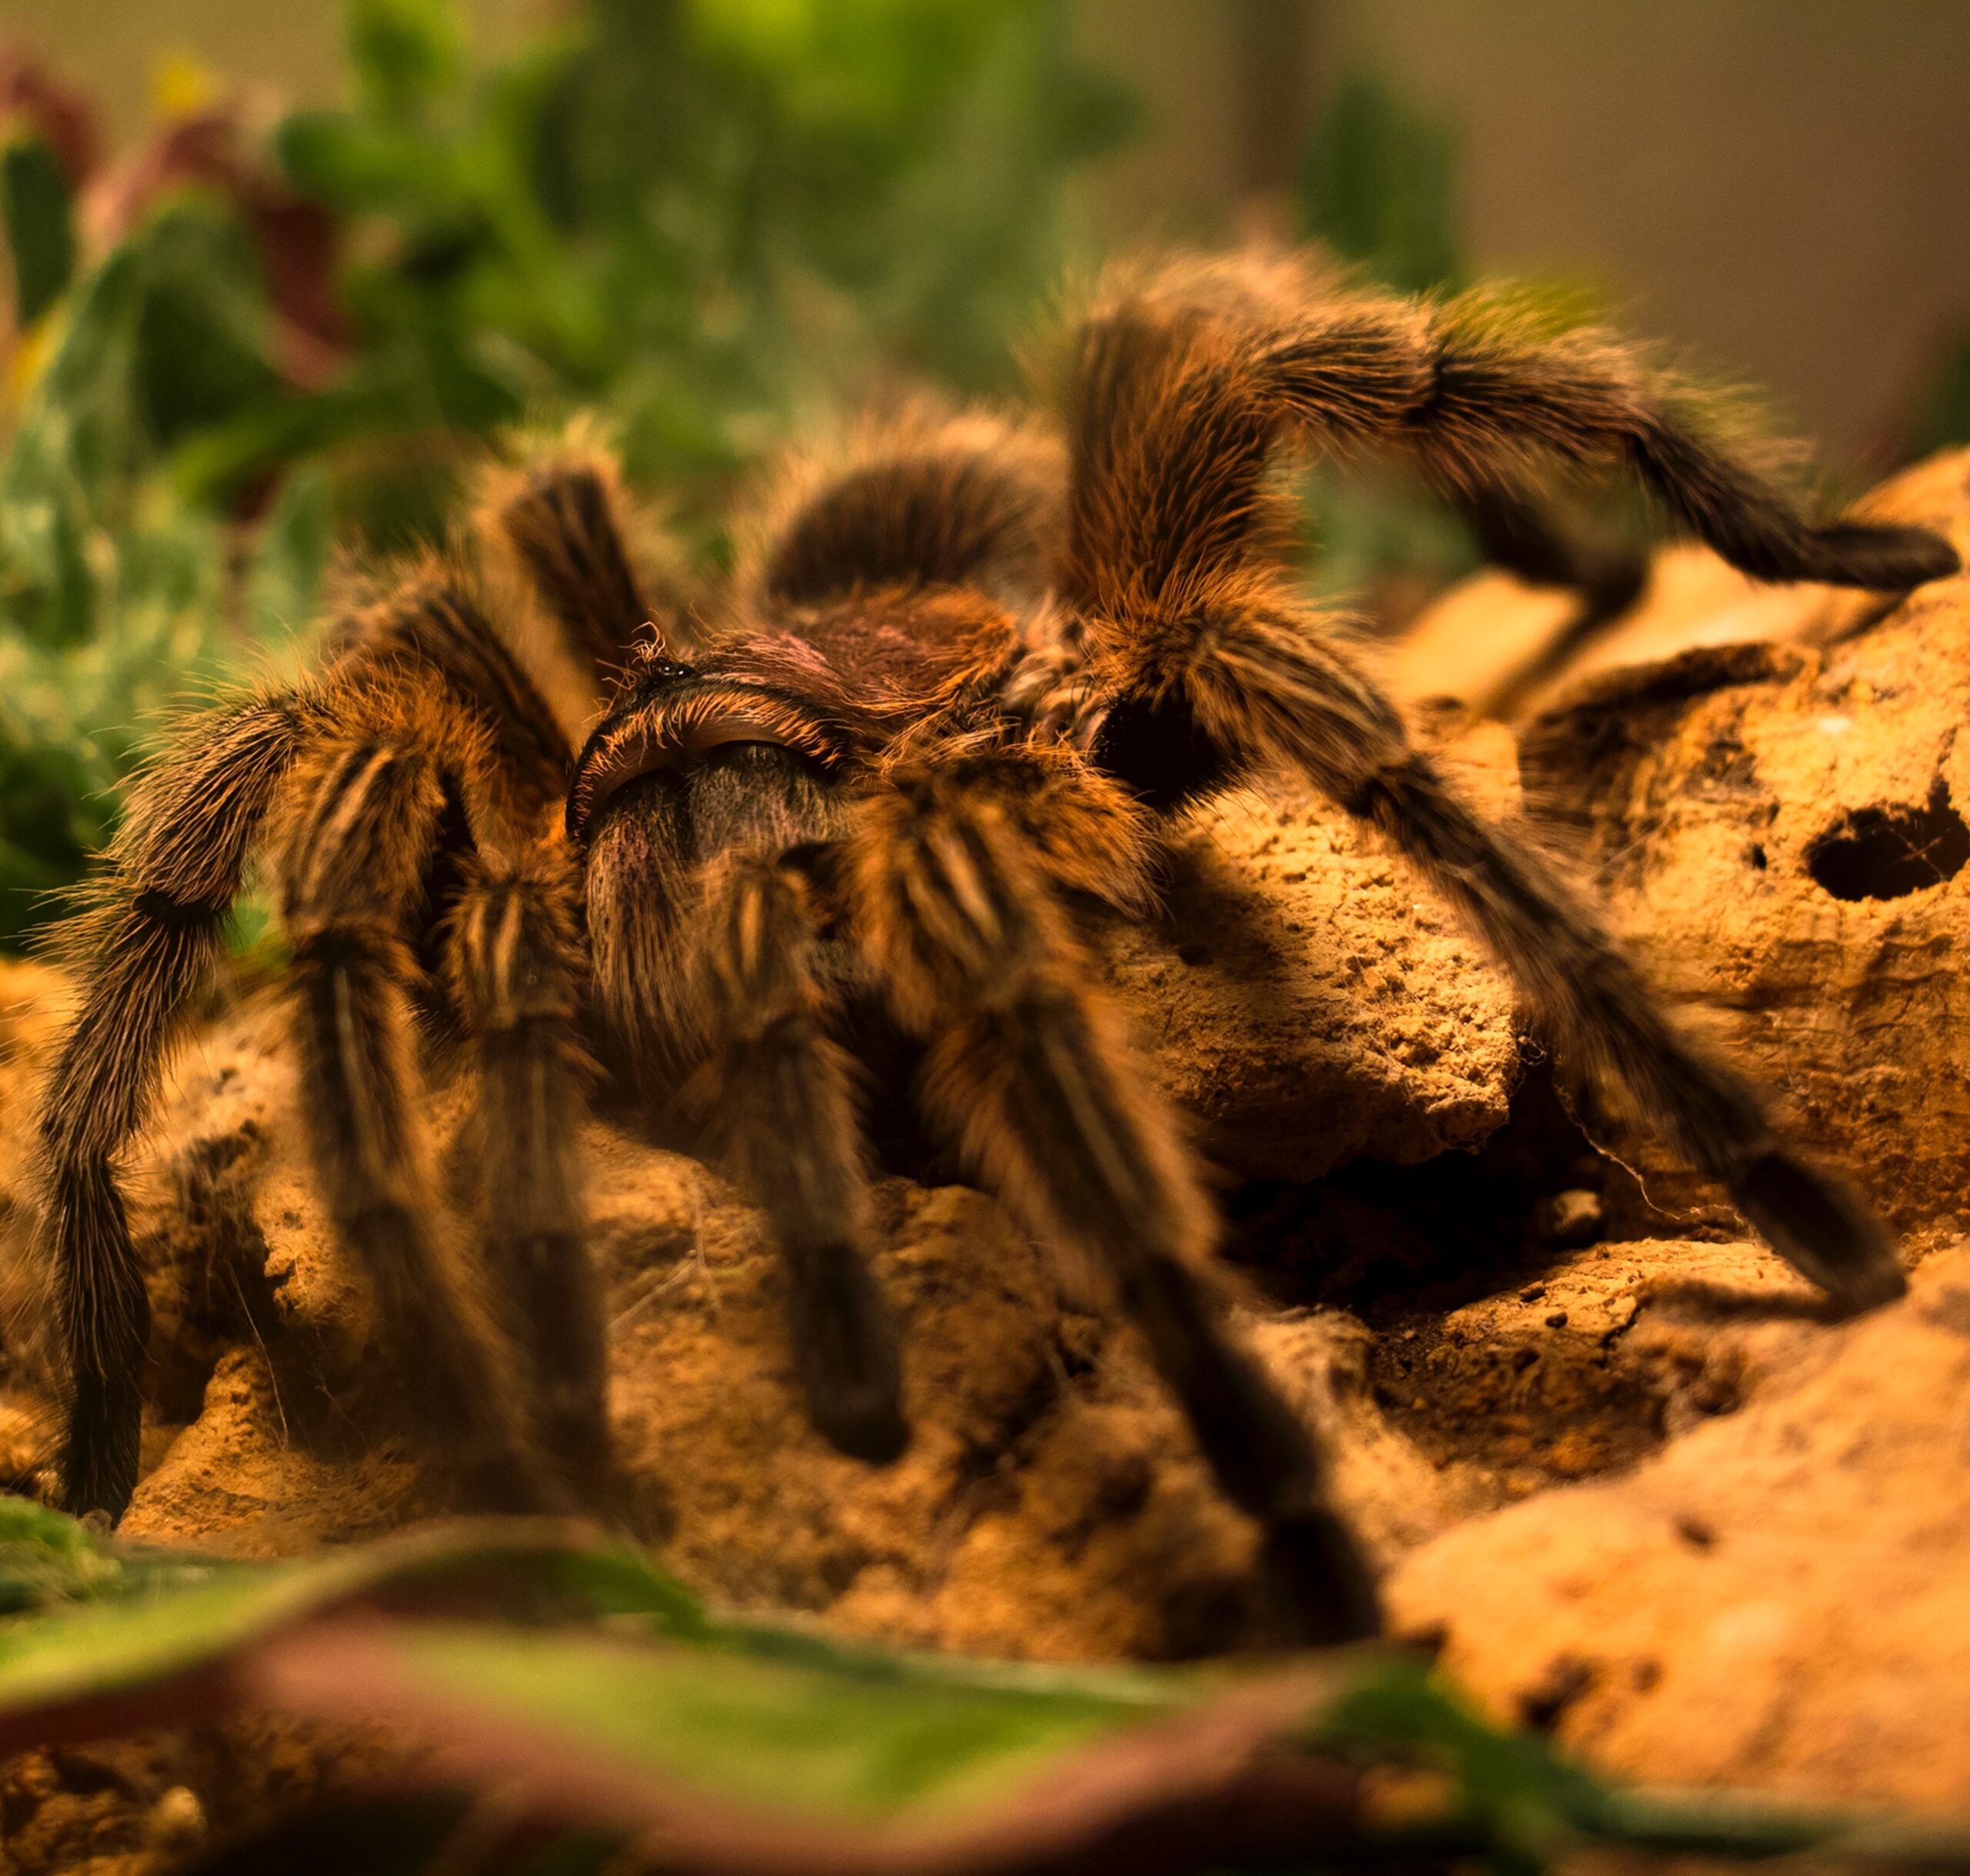 Spider Bite: What Is, Spider Species, Symptoms, and Treatment